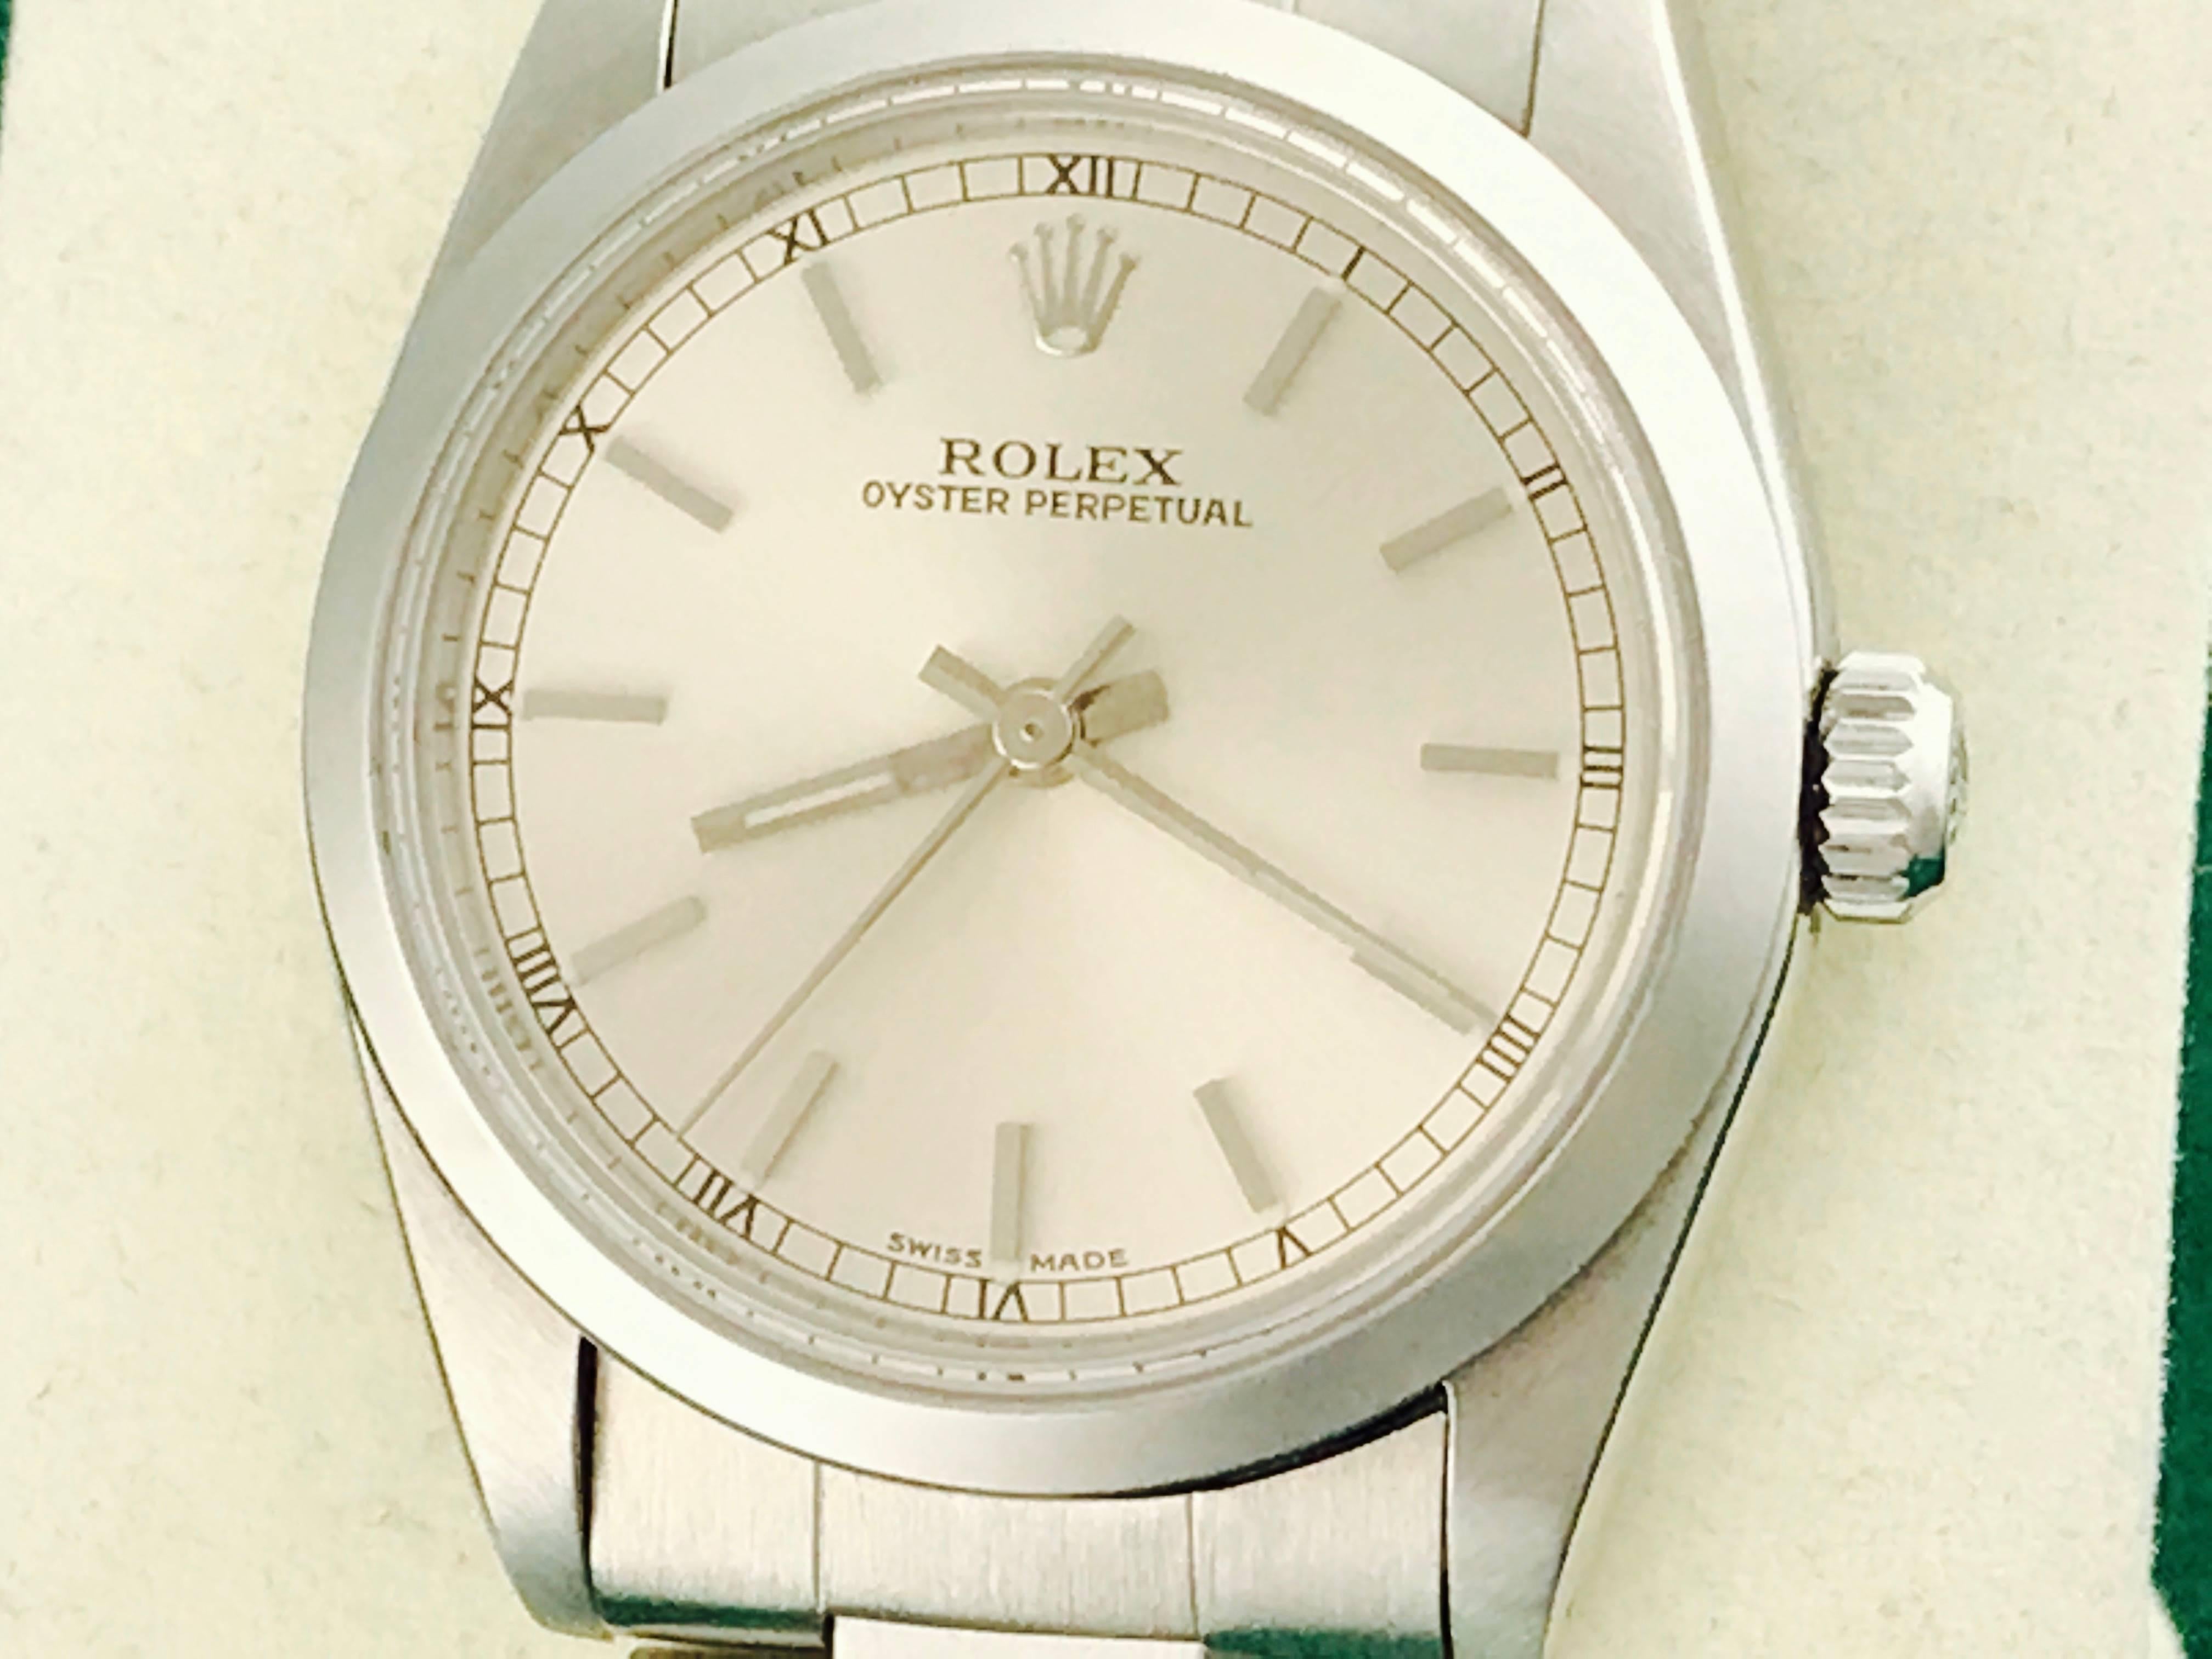 Mens Rolex Oyster Perpetual Model 77080 Stainless Steel Automatic Wrist Watch. Certified pre-owned and ready to ship.  Stainless Steel case with smooth bezel, 30mm diameter.  Stainless Steel oyster bracelet. Silver dial with polished hour markers. 